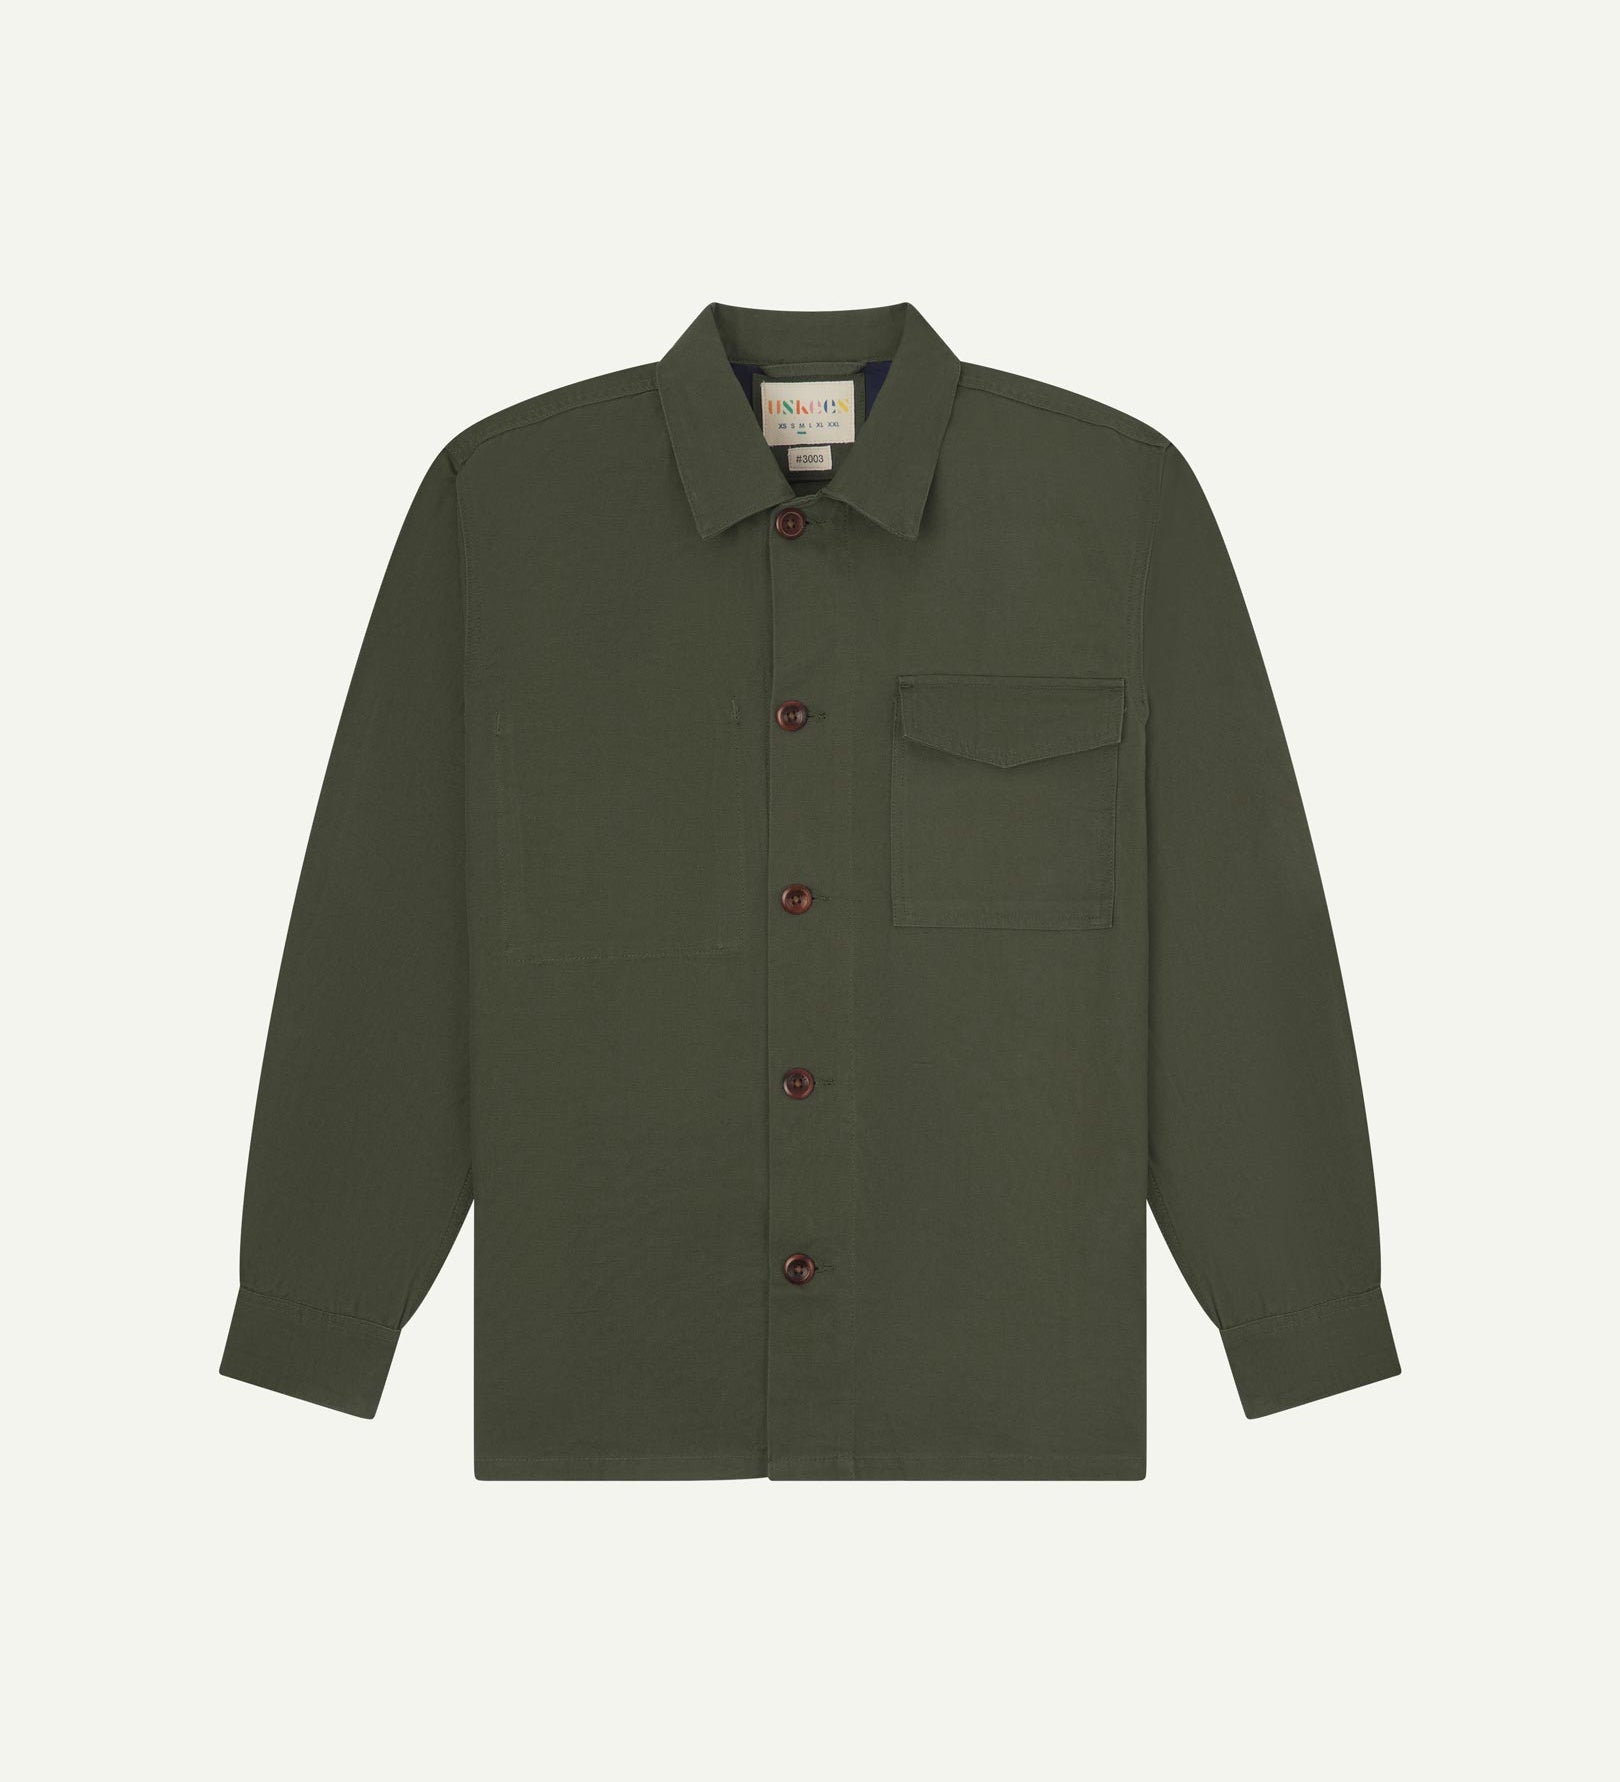 Vine green buttoned organic cotton workshirt from Uskees with clear view of chest pocket and Uskees branding label.